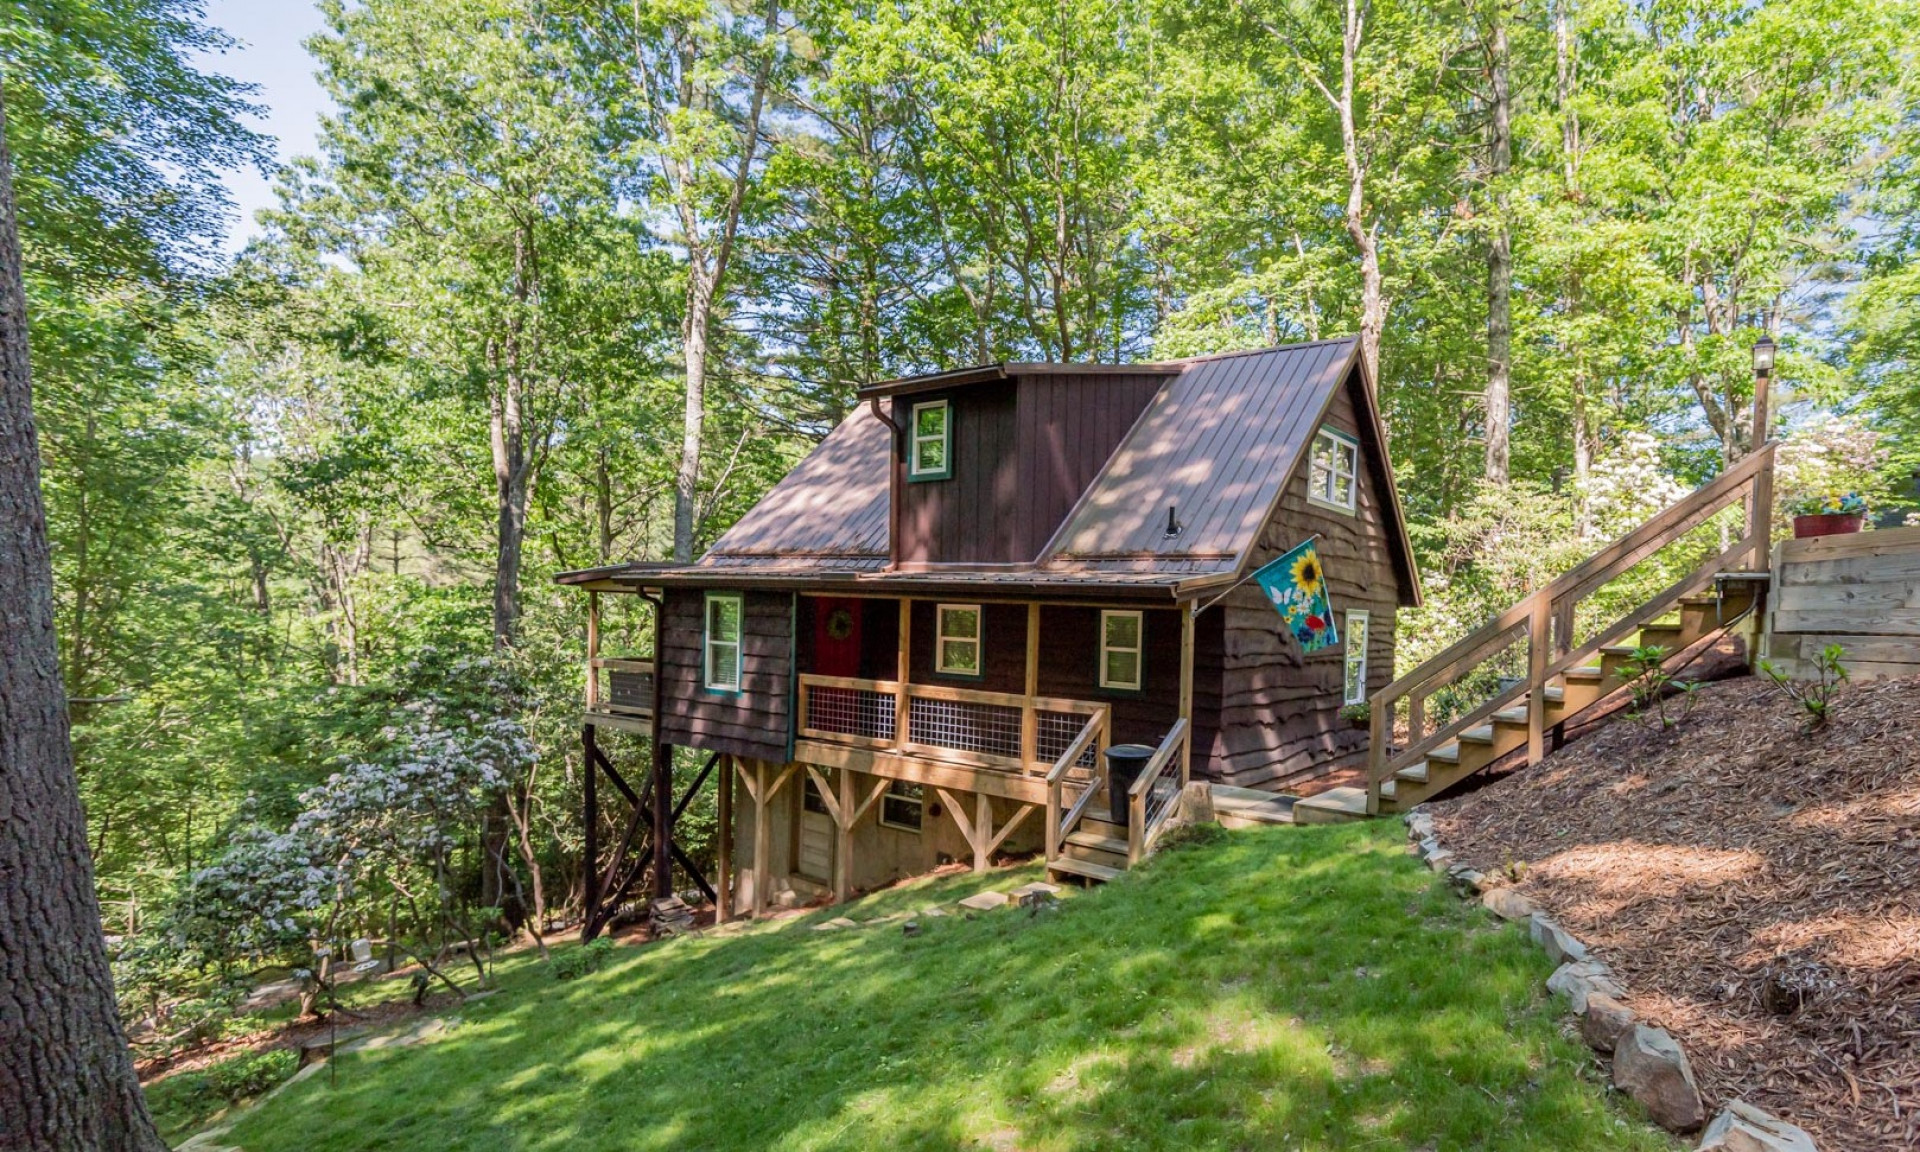 Southern Ashe County Cabin in the Woods.